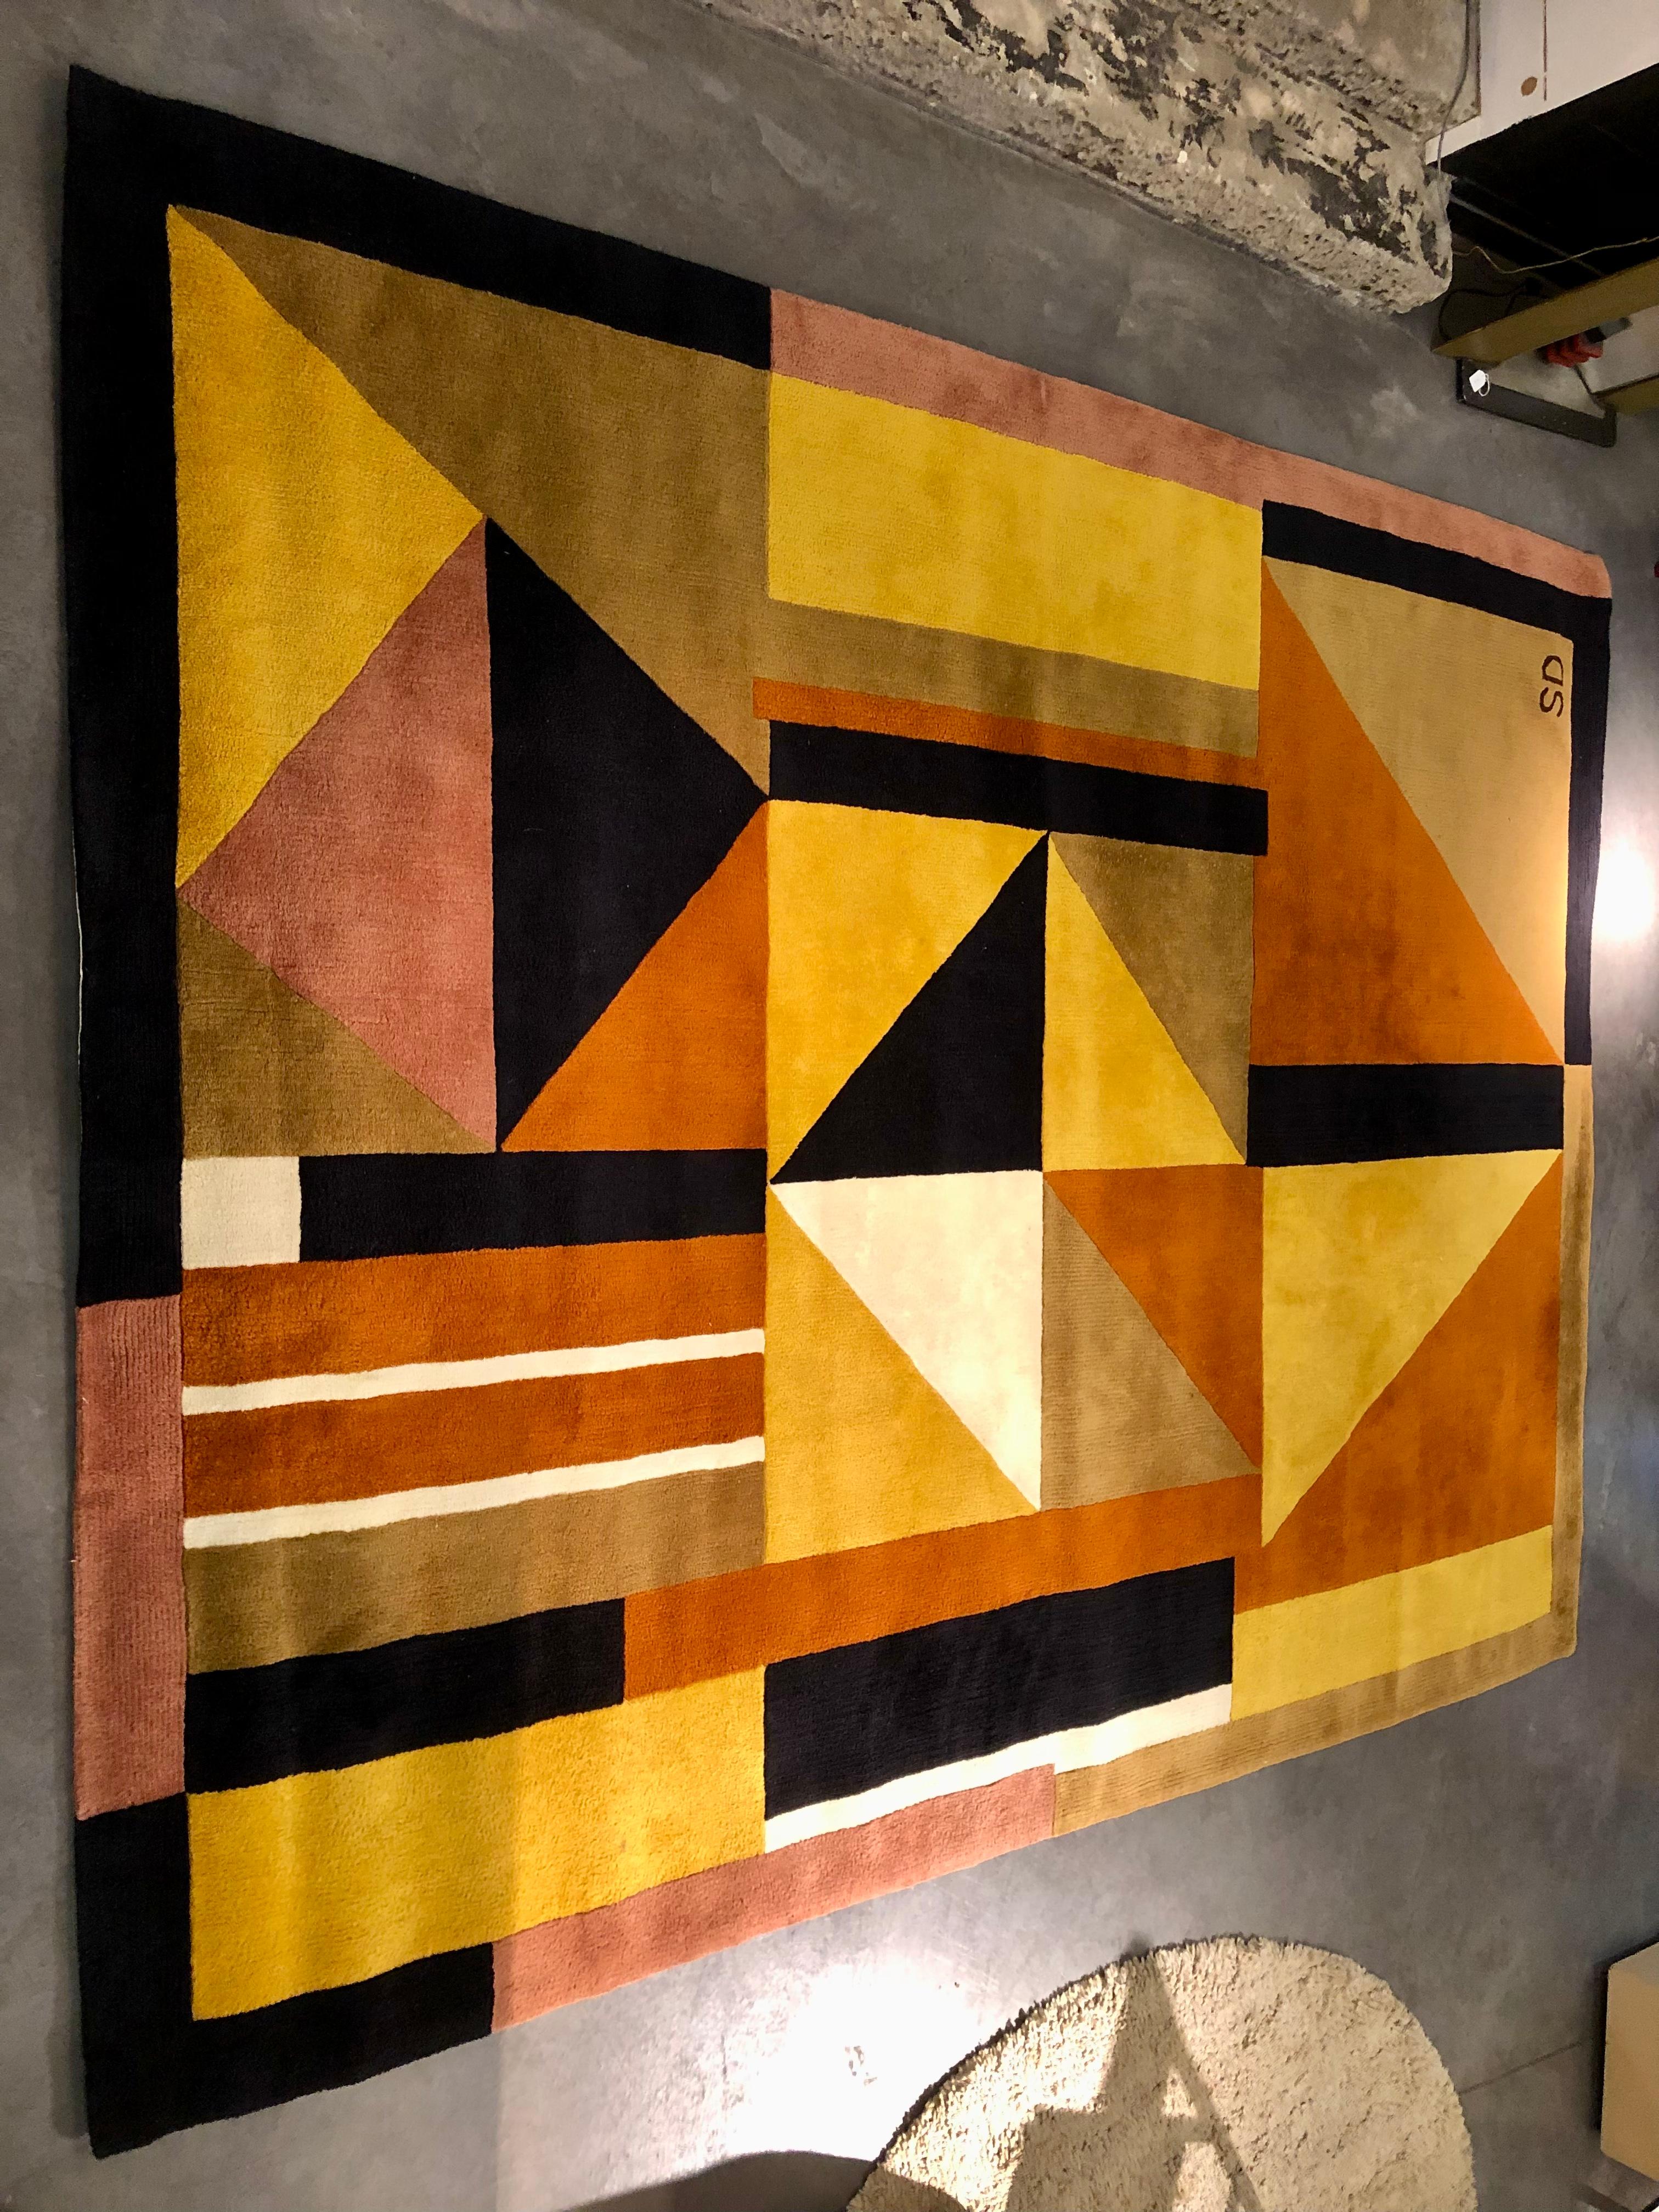 French Rug Designed by Sonia Delaunay Edited by Artcurial in 10 Exemplars